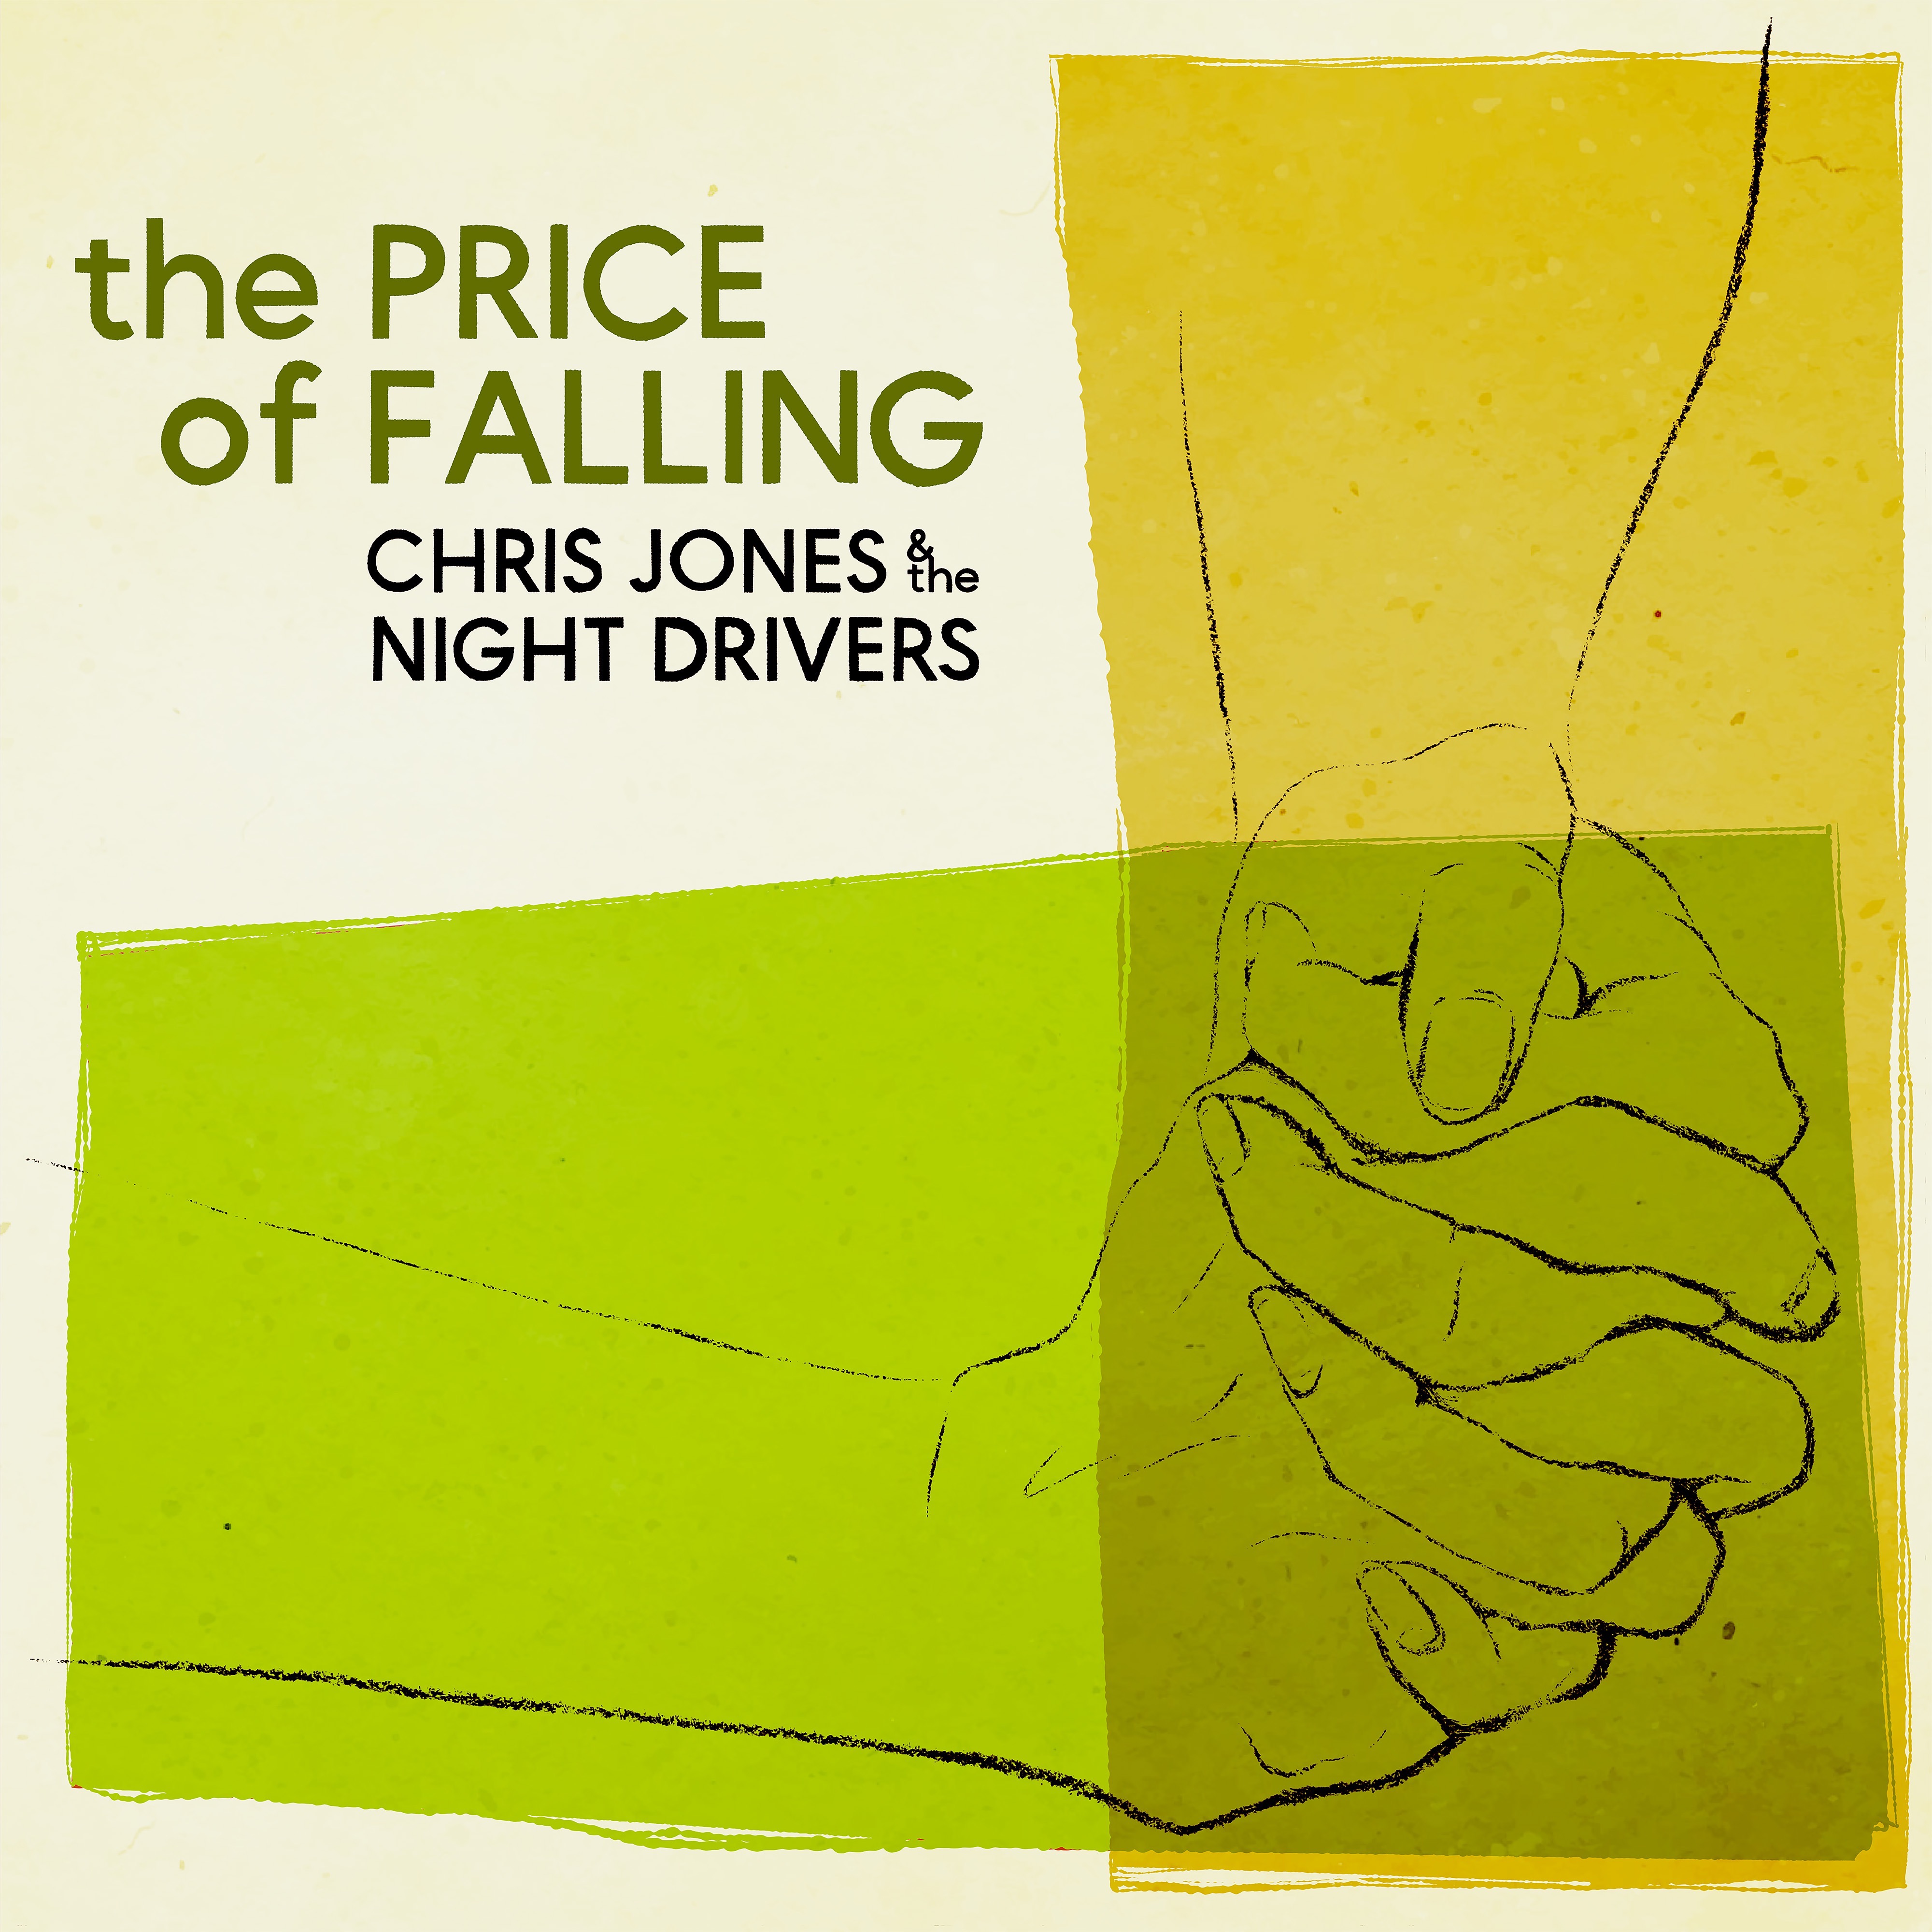 Art for The Price of Falling by Chris Jones & The Night Drivers